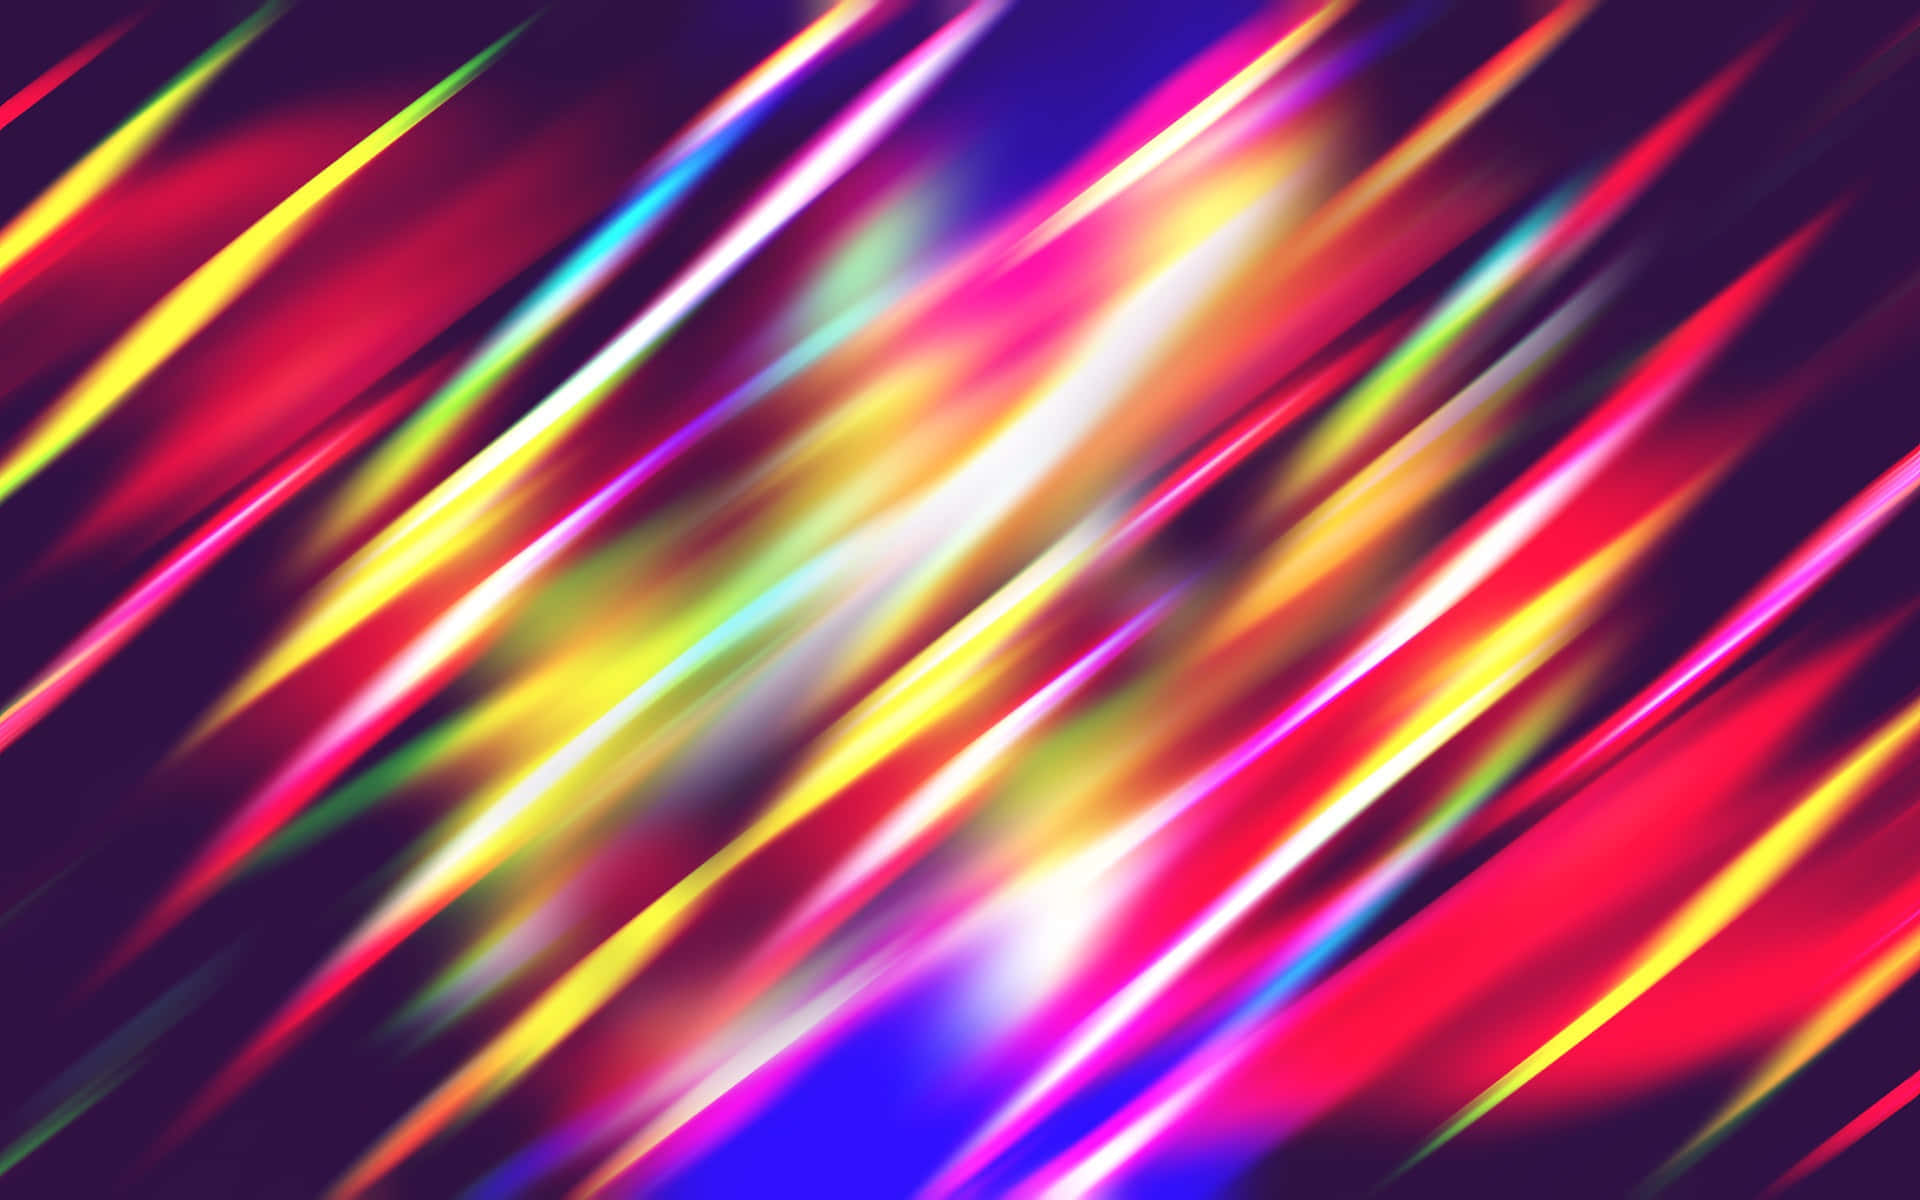 A bright and colorful neon abstract image Wallpaper